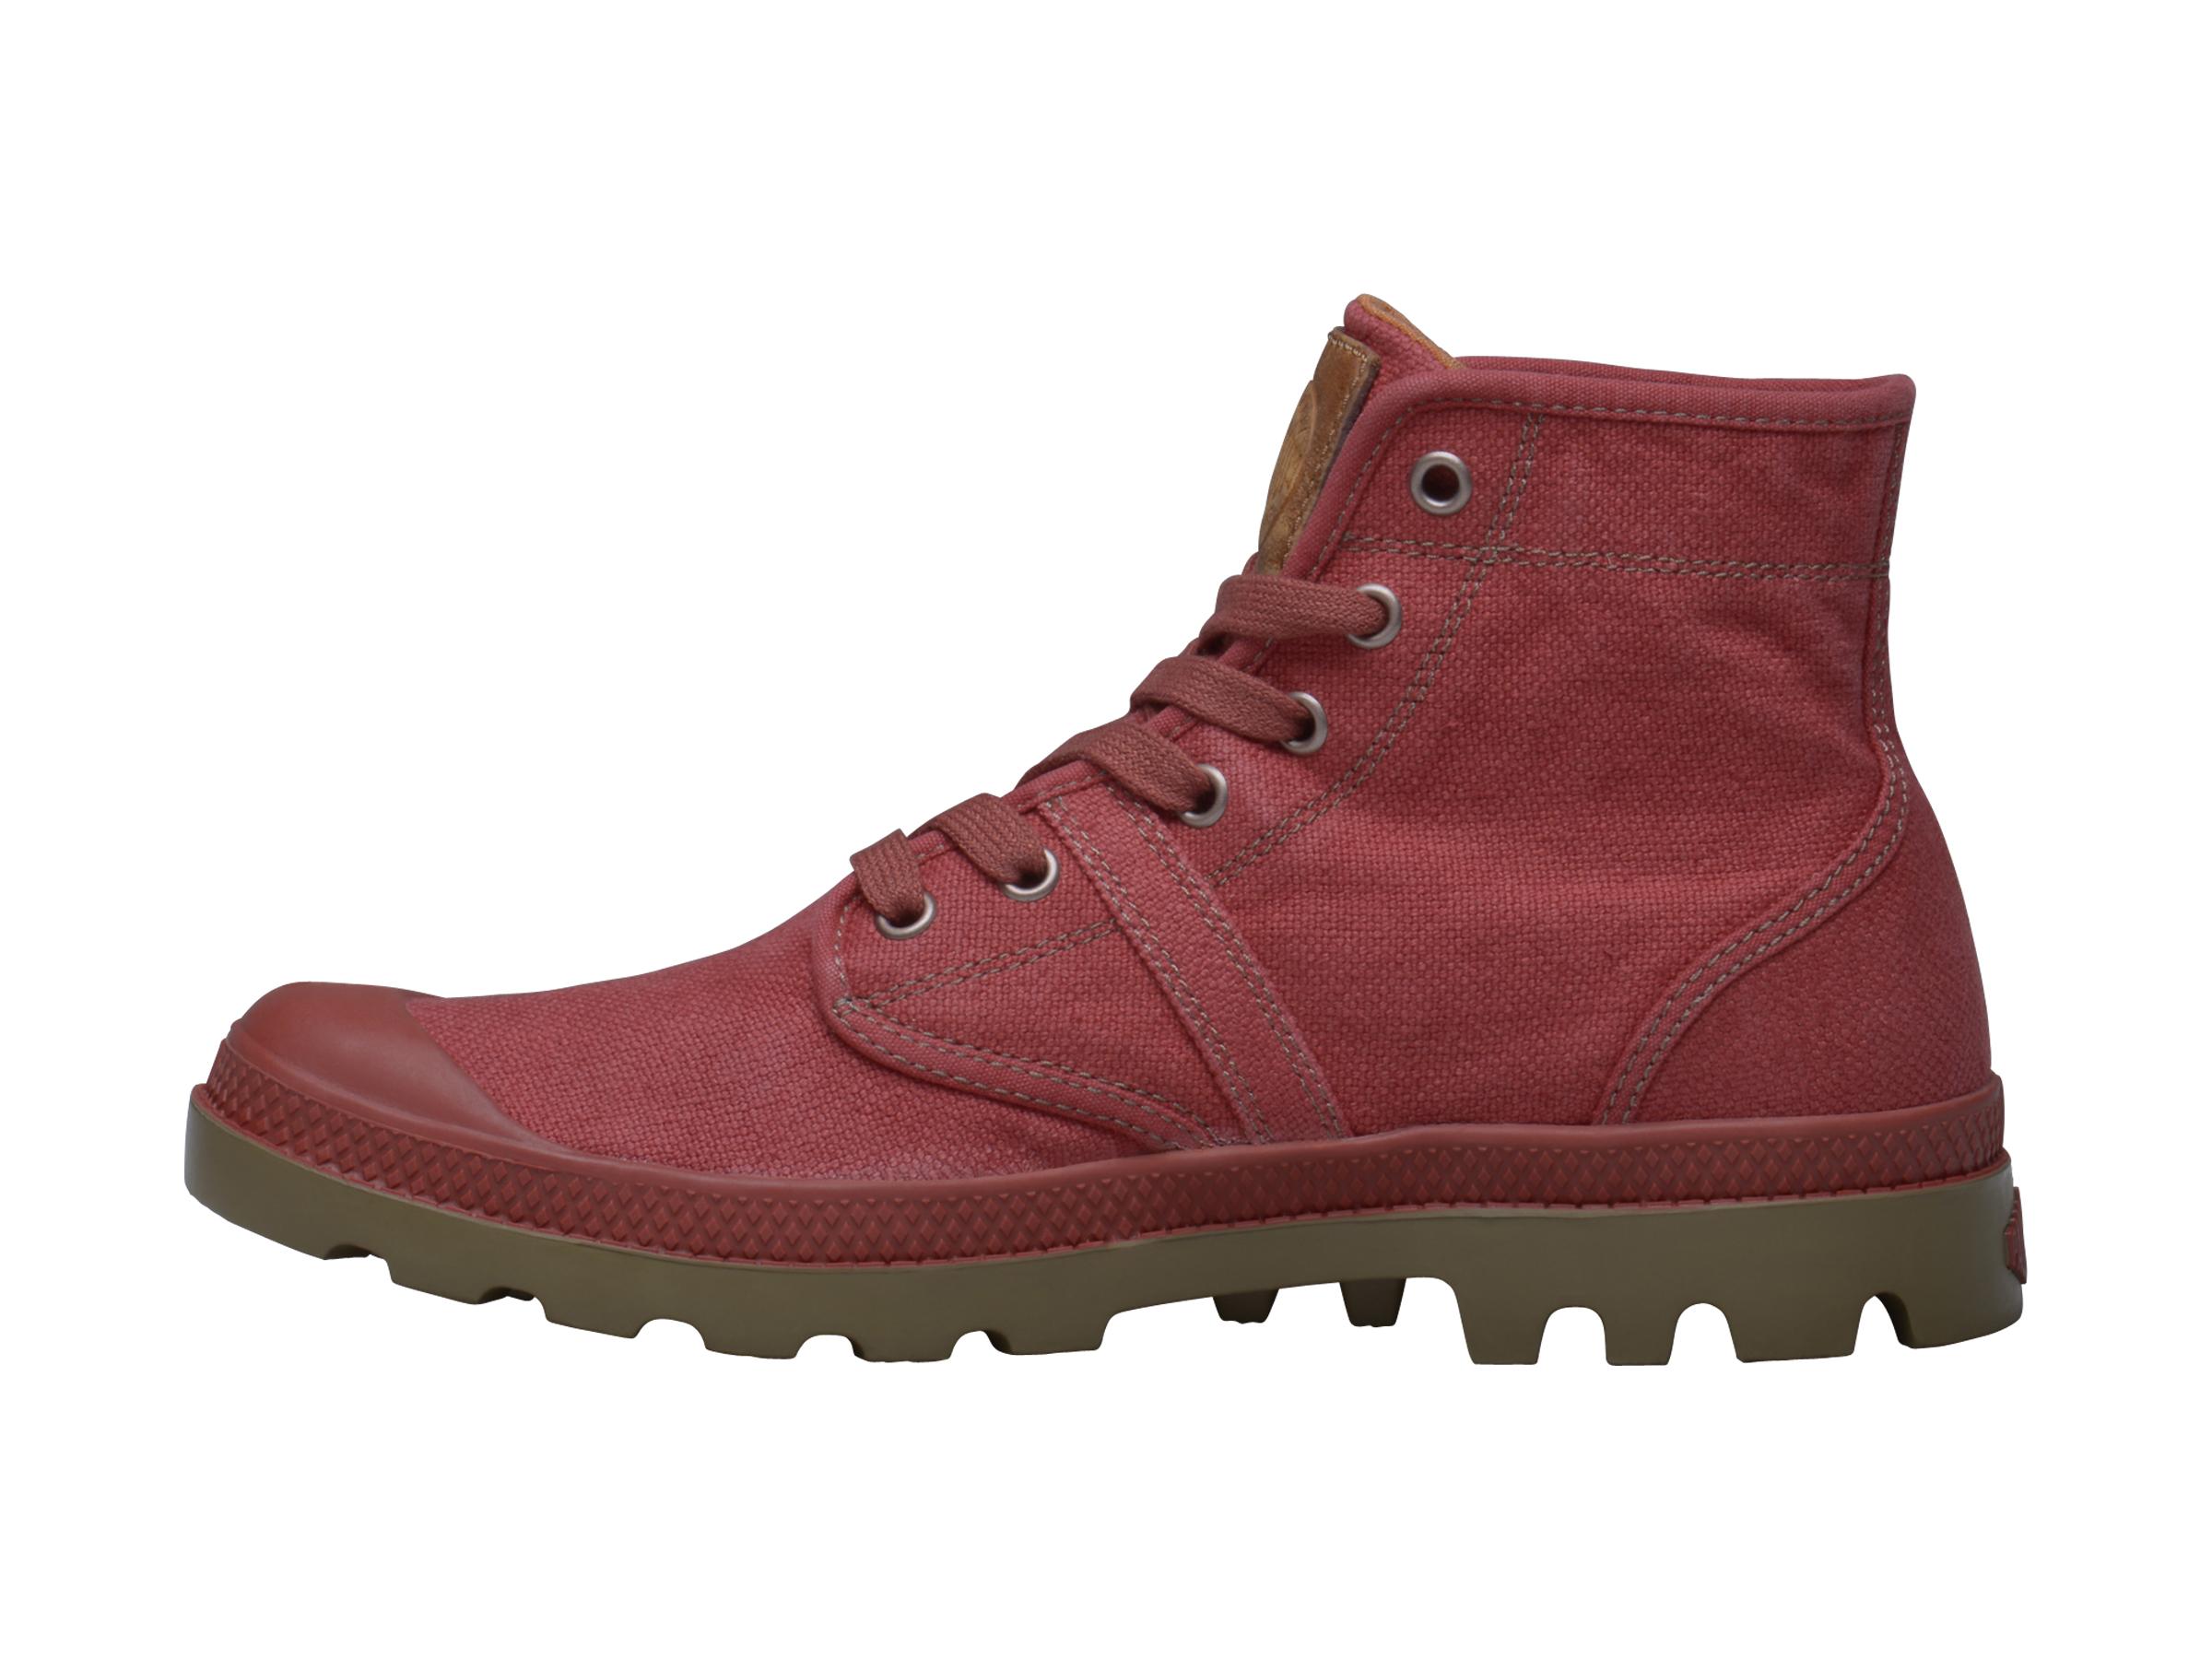 Boots PALLADIUM Pallabrouse Red Ochre Baked Clay 03317-622-M